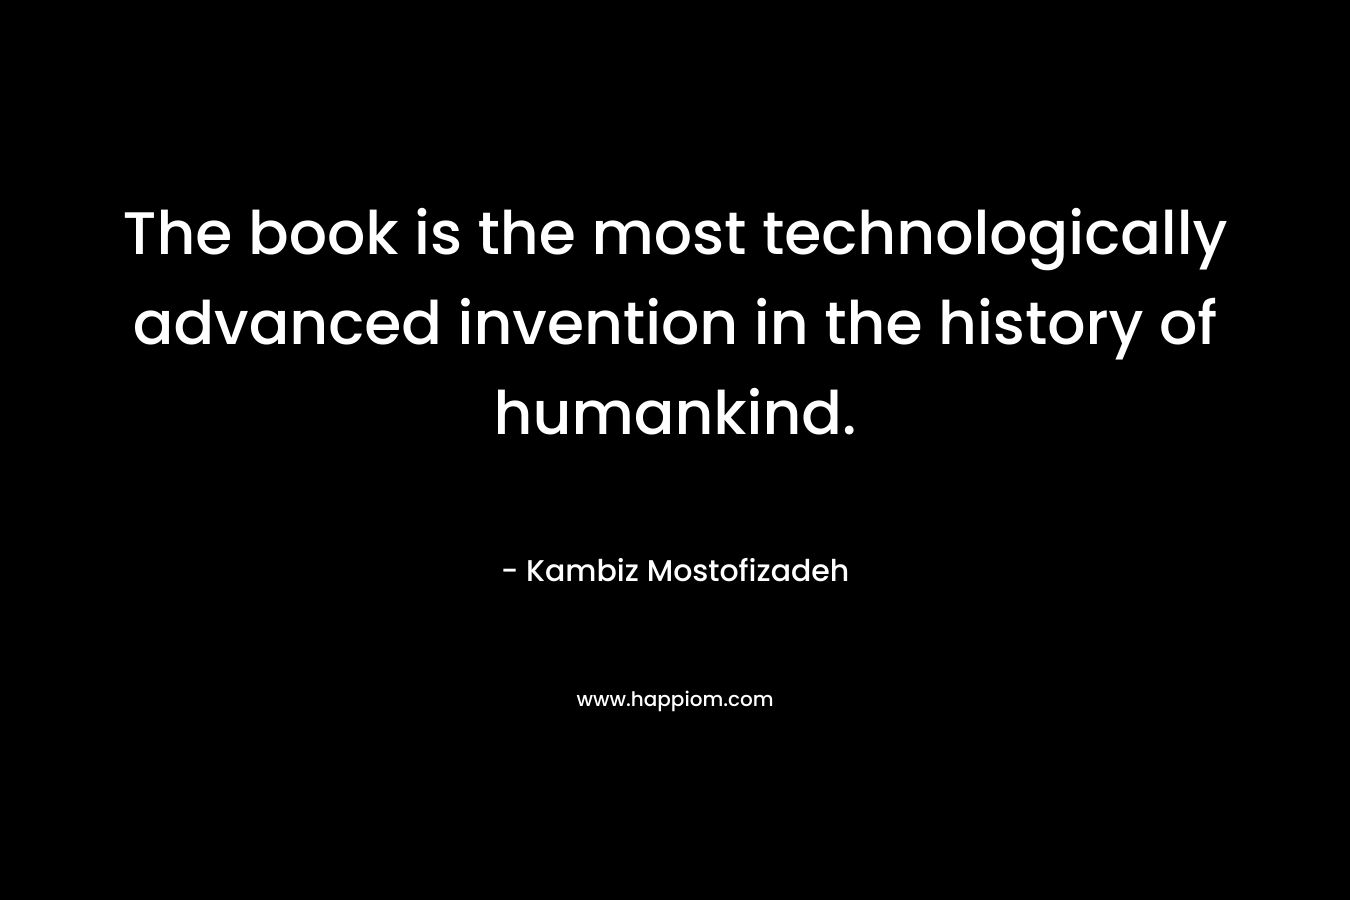 The book is the most technologically advanced invention in the history of humankind.